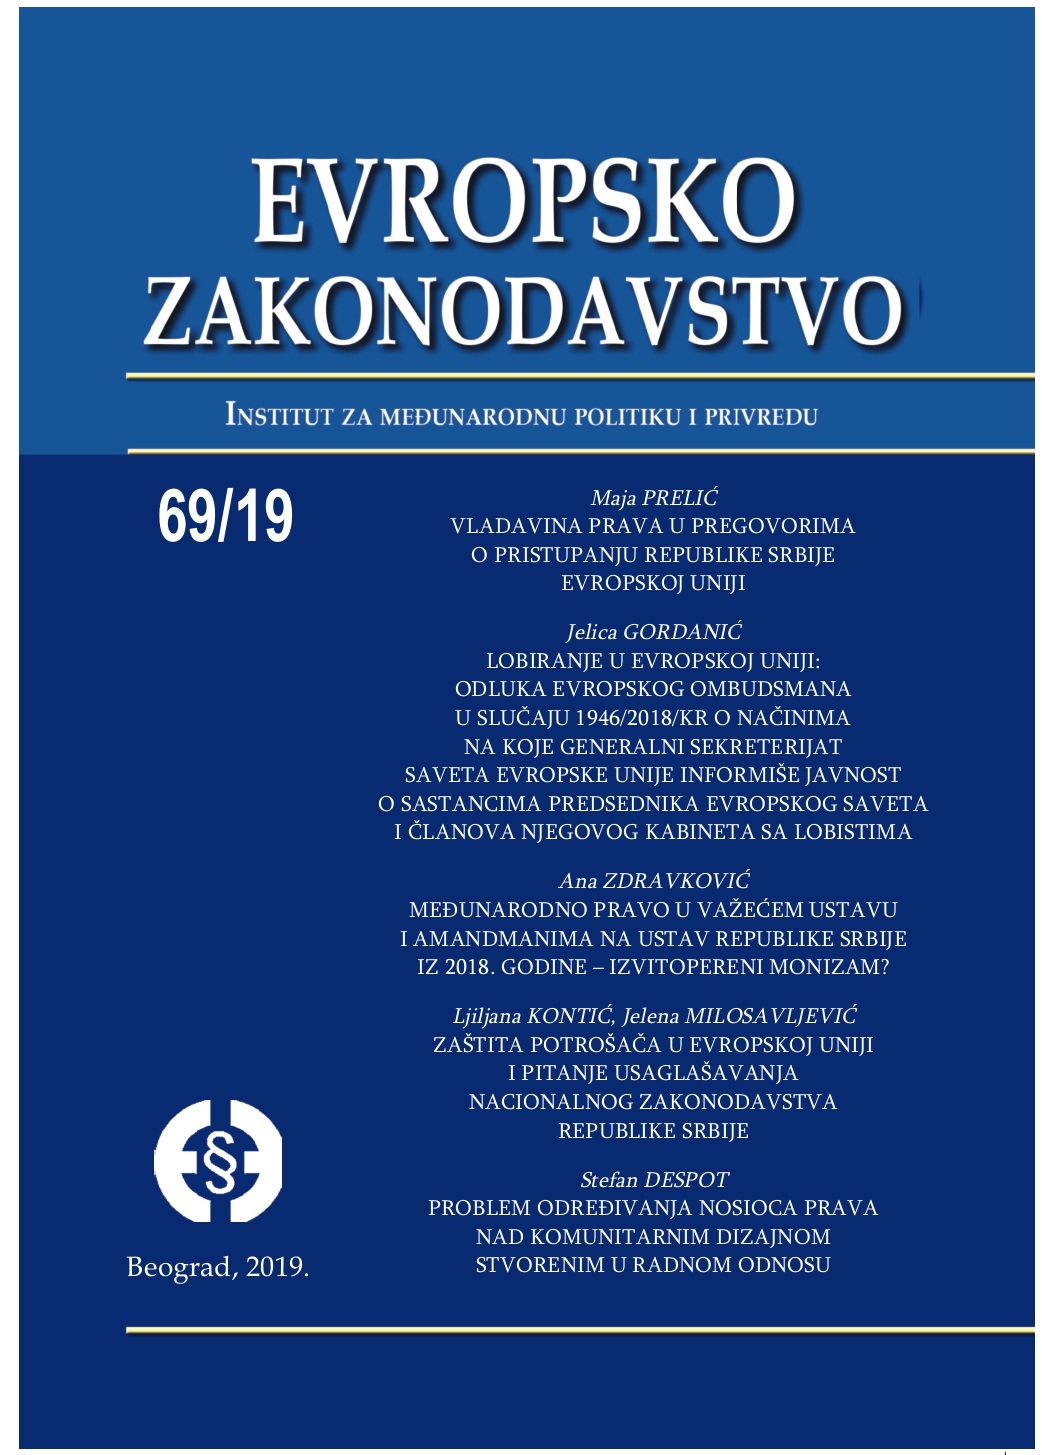 International law in Serbian constitution and proposed amandments from 2018 - fake monism? Cover Image